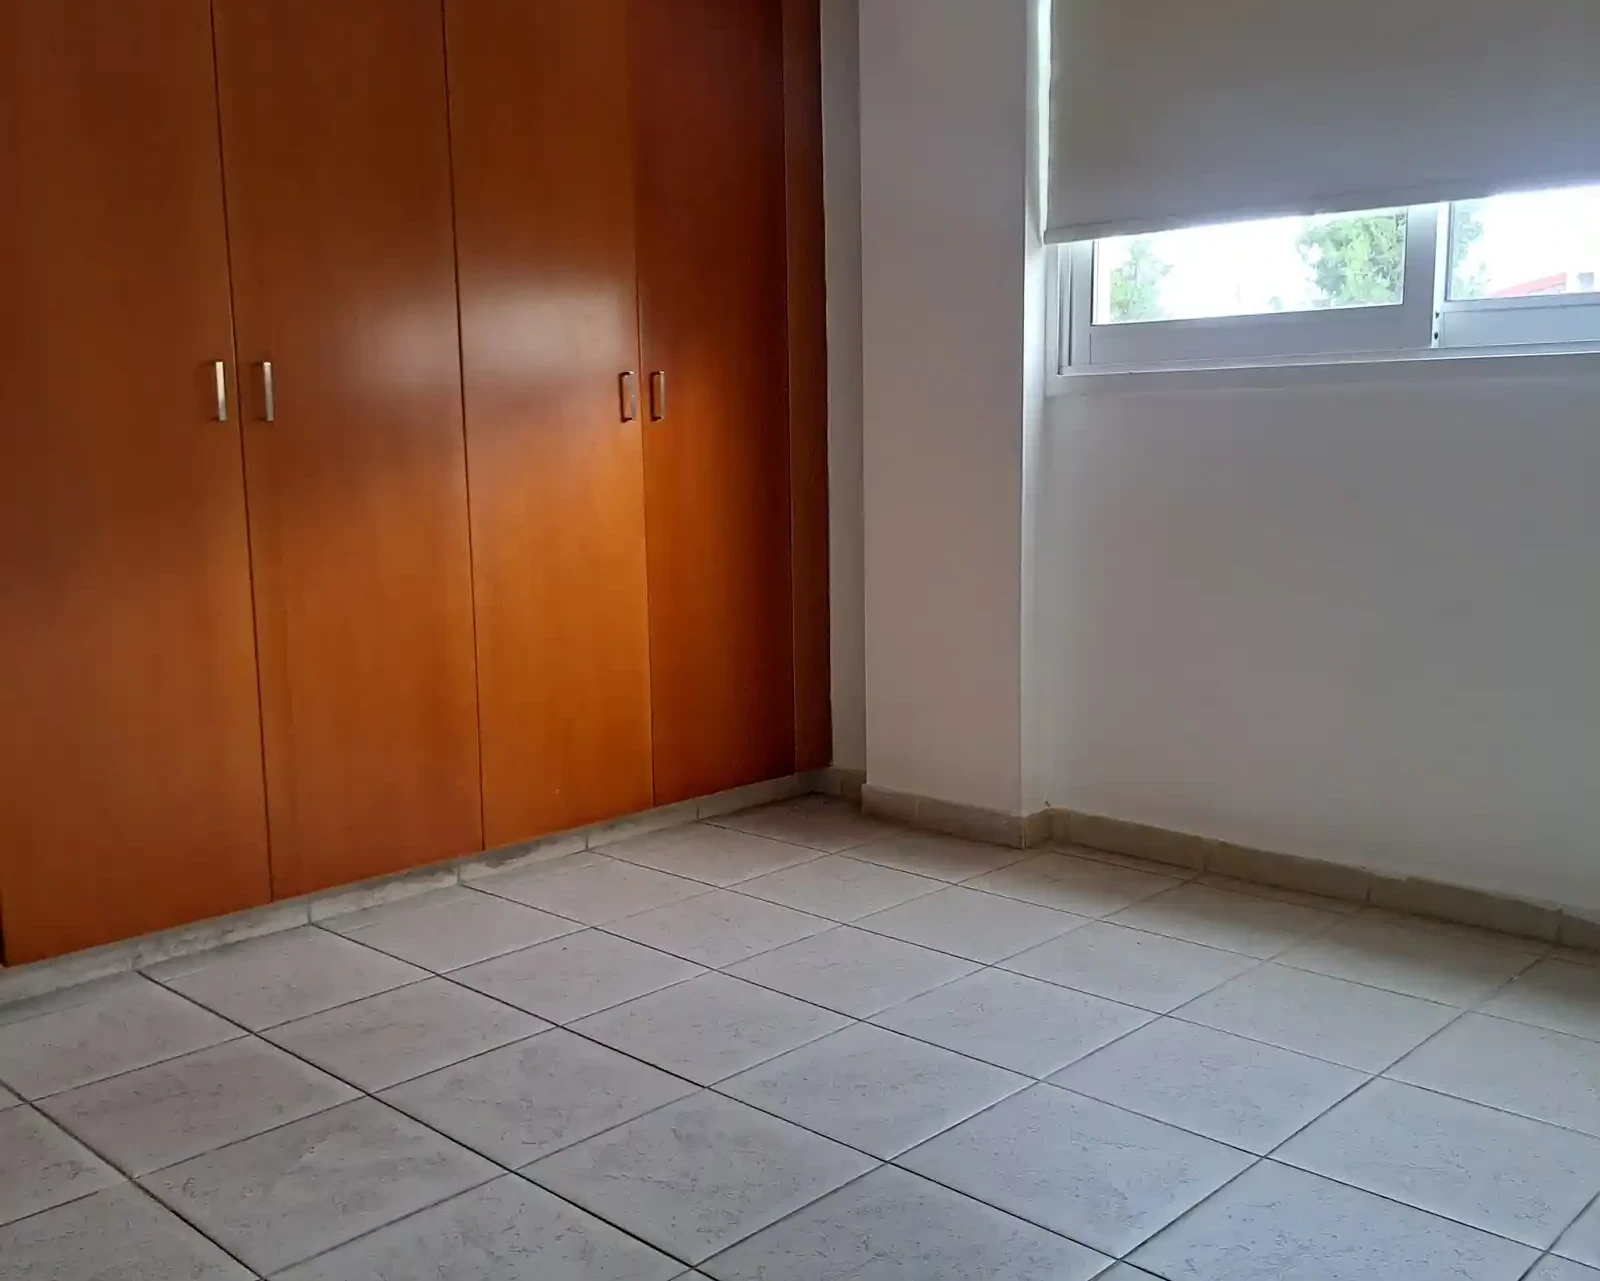 3-bedroom apartment fоr sаle €187.000, image 1